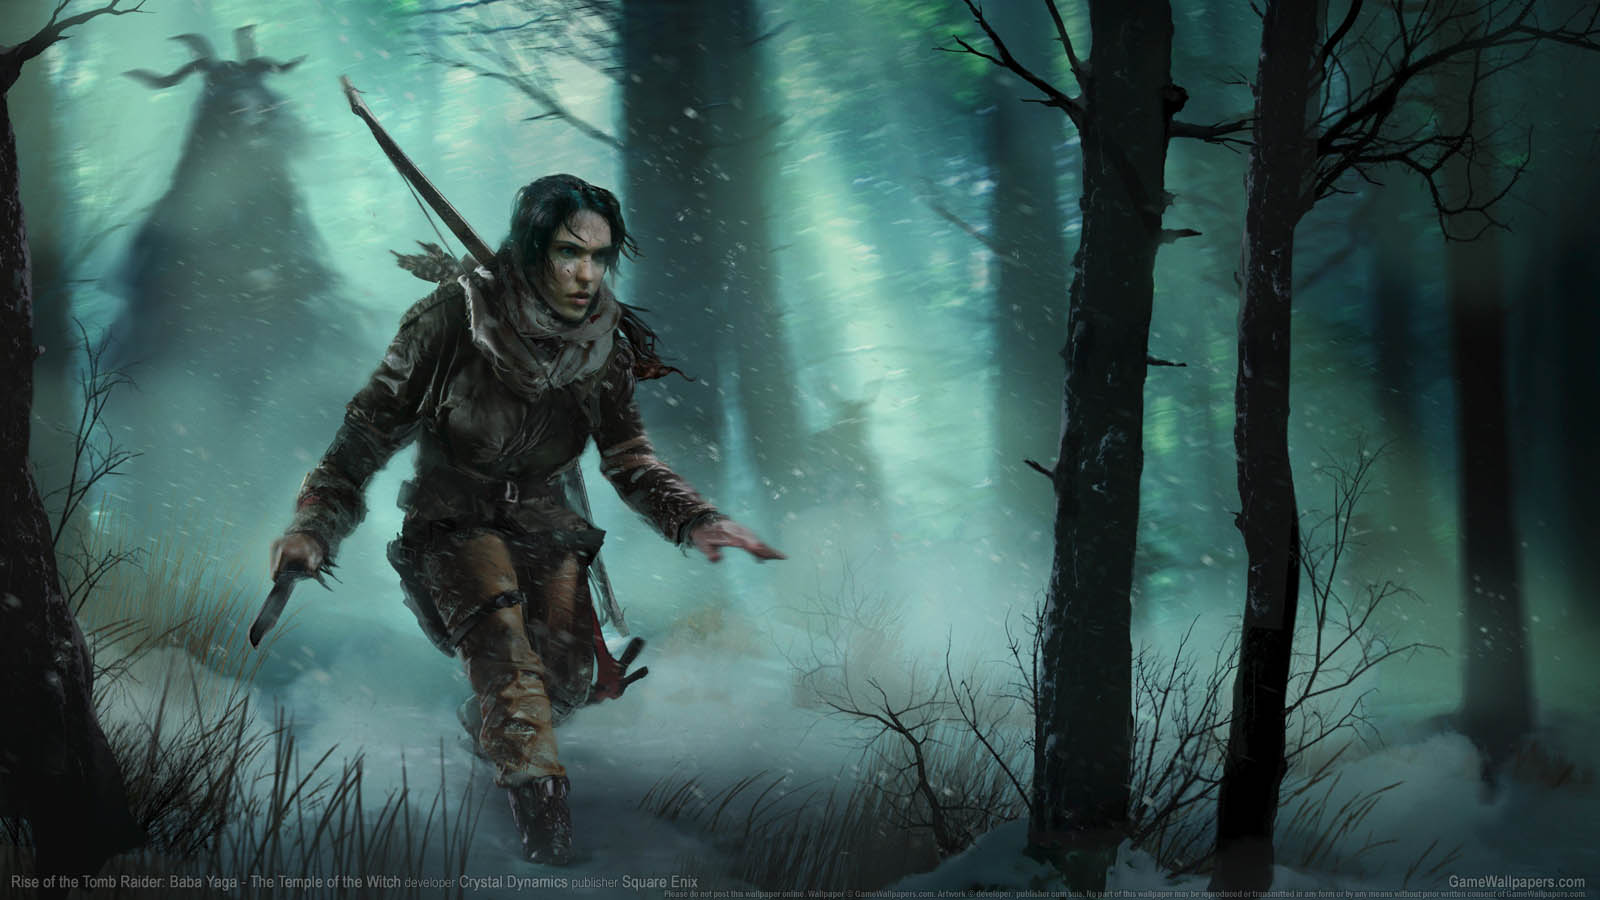 Rise of the Tomb Raider: Baba Yaga - The Temple of the Witch achtergrond 01 1600x900